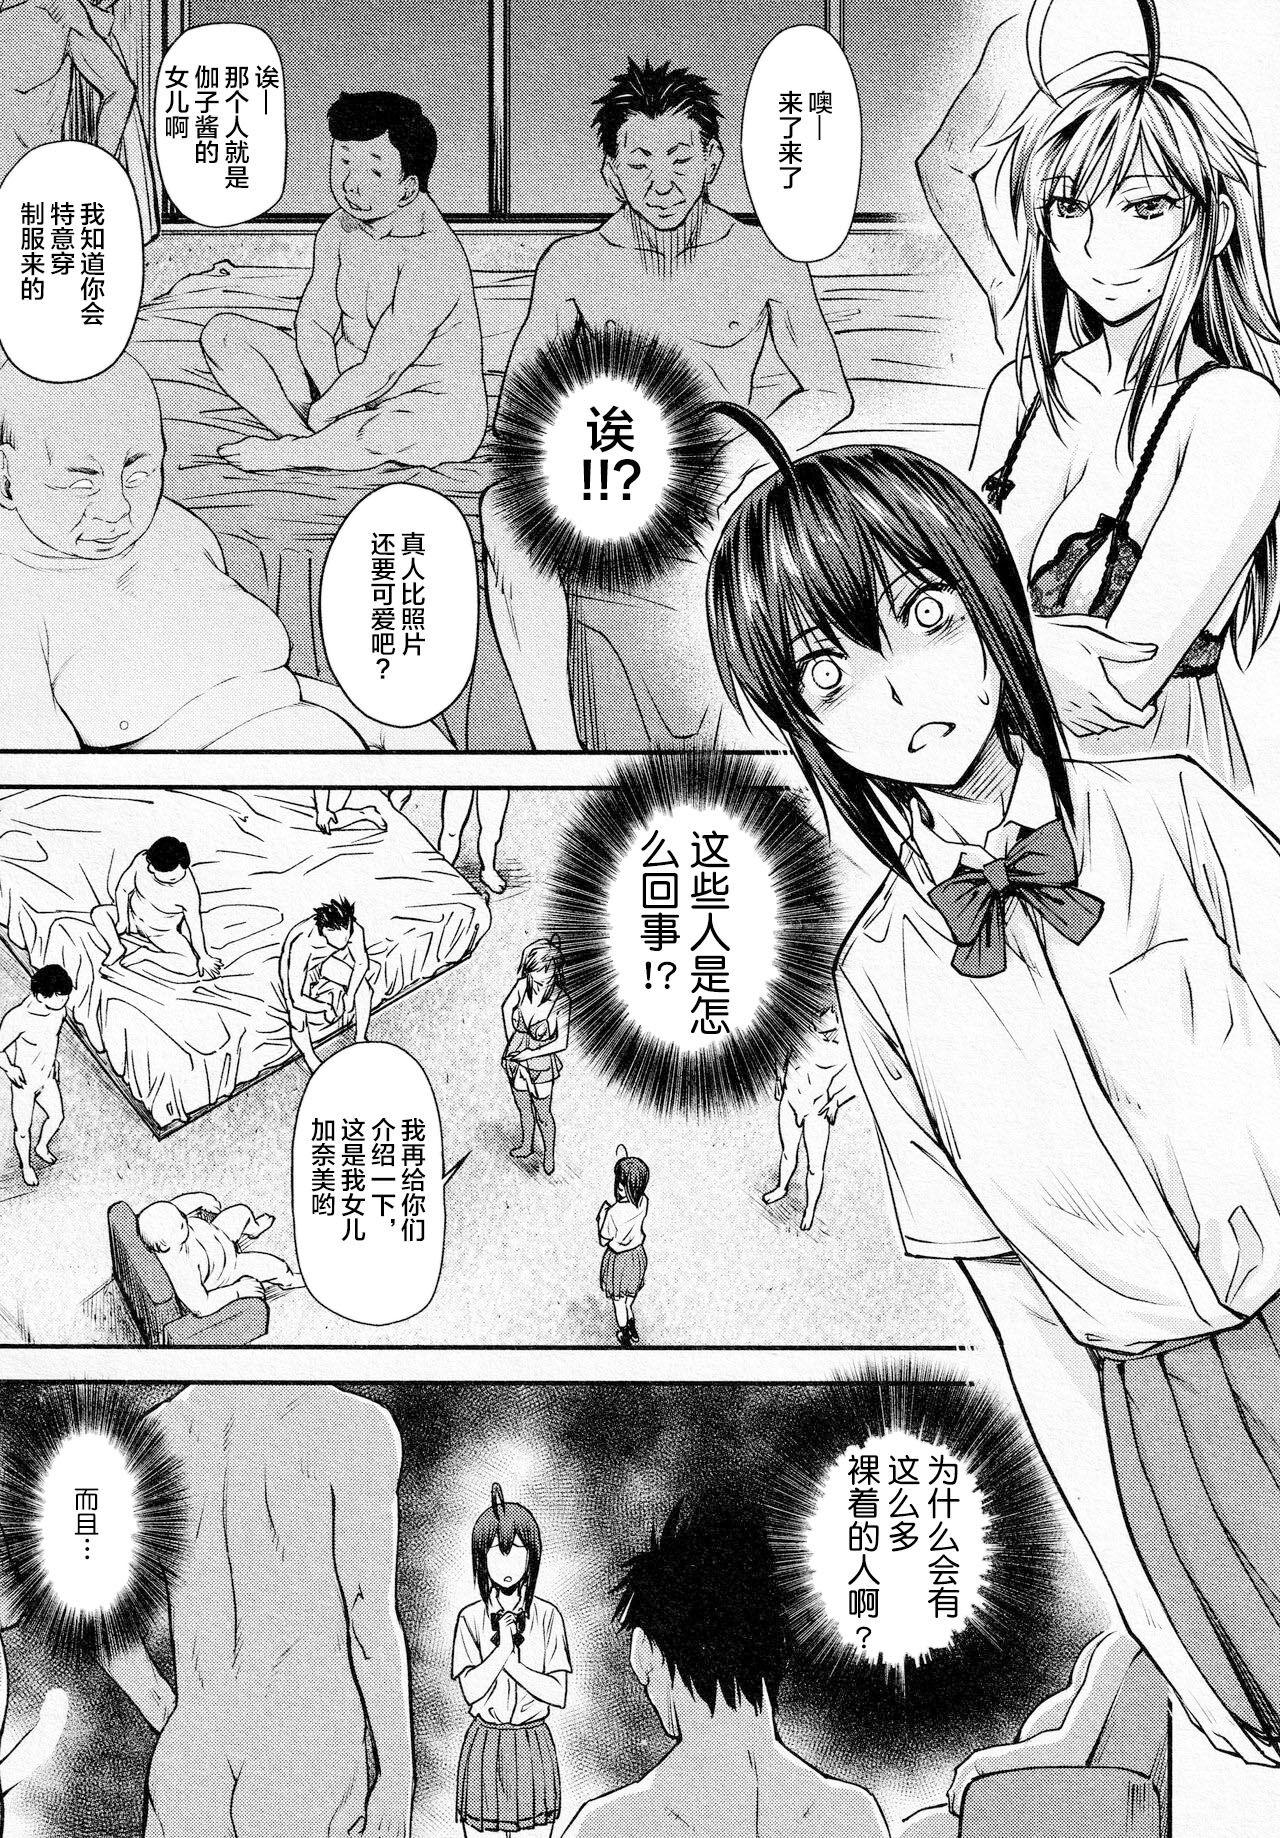 Penetration Kaname Date #14 Huge Dick - Page 6